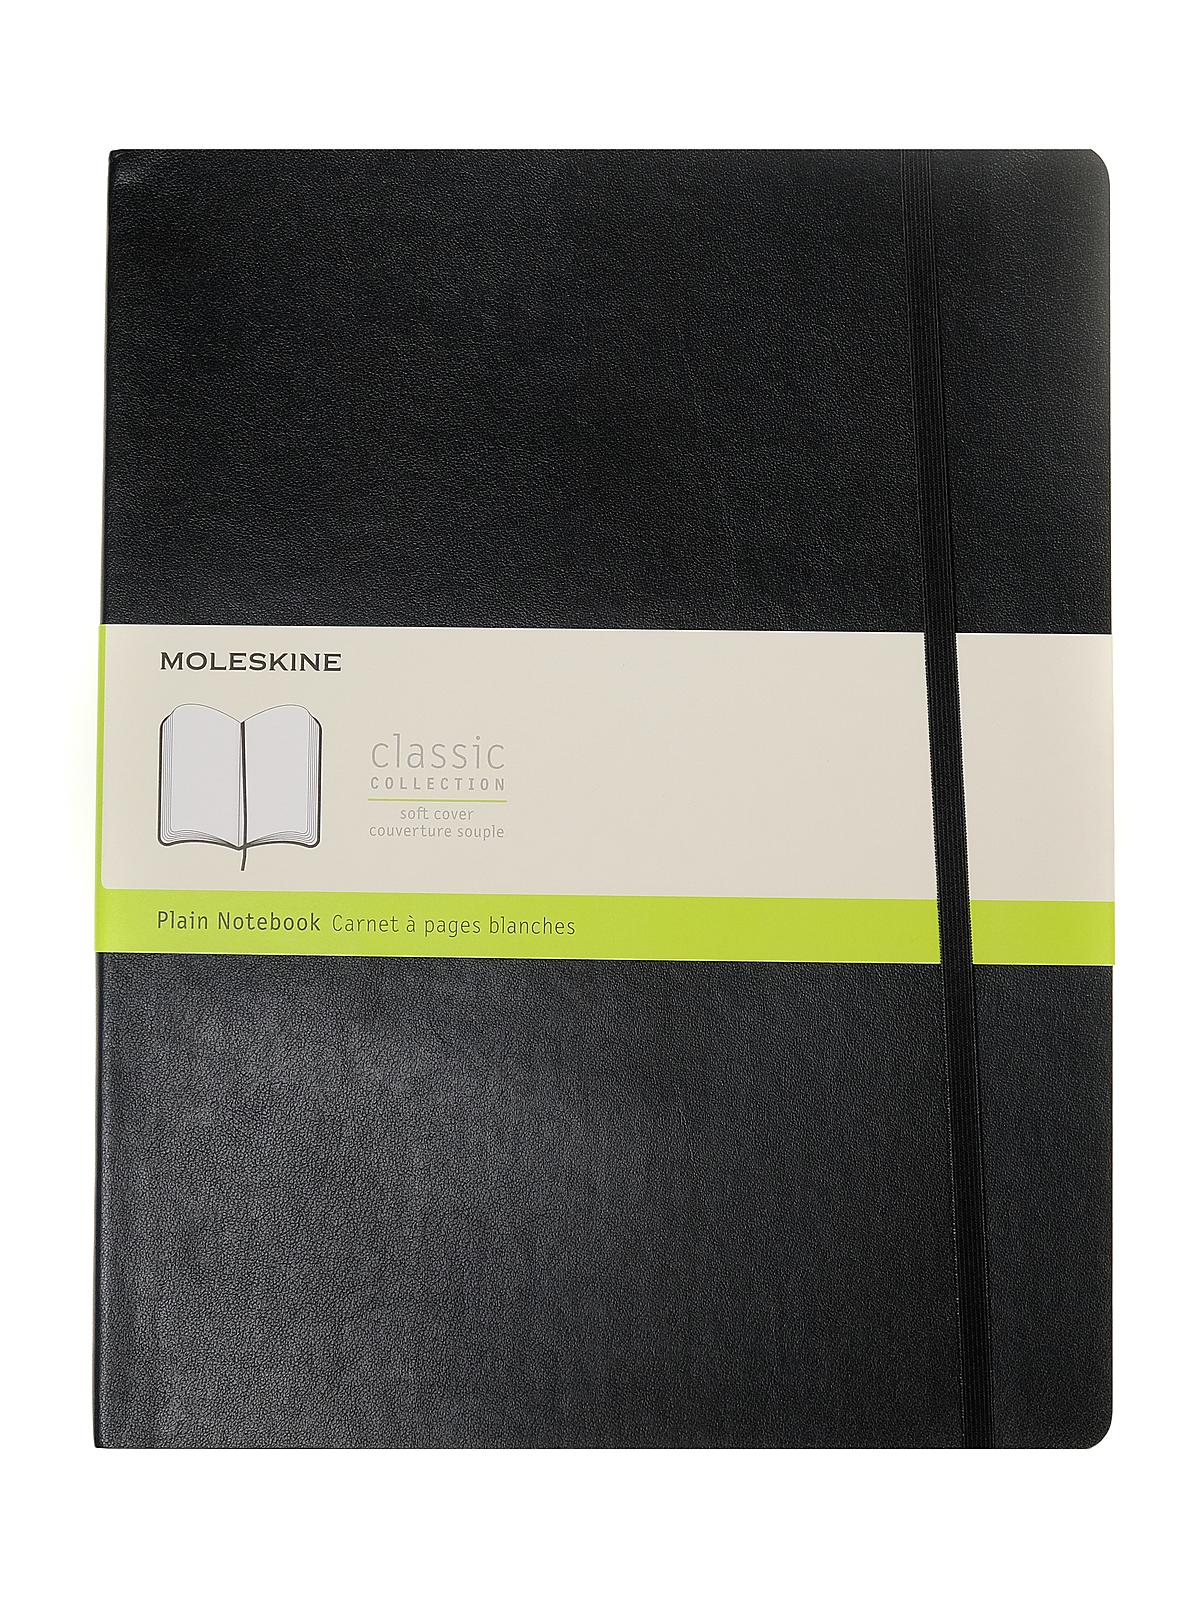 Classic Soft Cover Notebooks Black 8 1 2 In. X 11 In. 192 Pages, Unlined